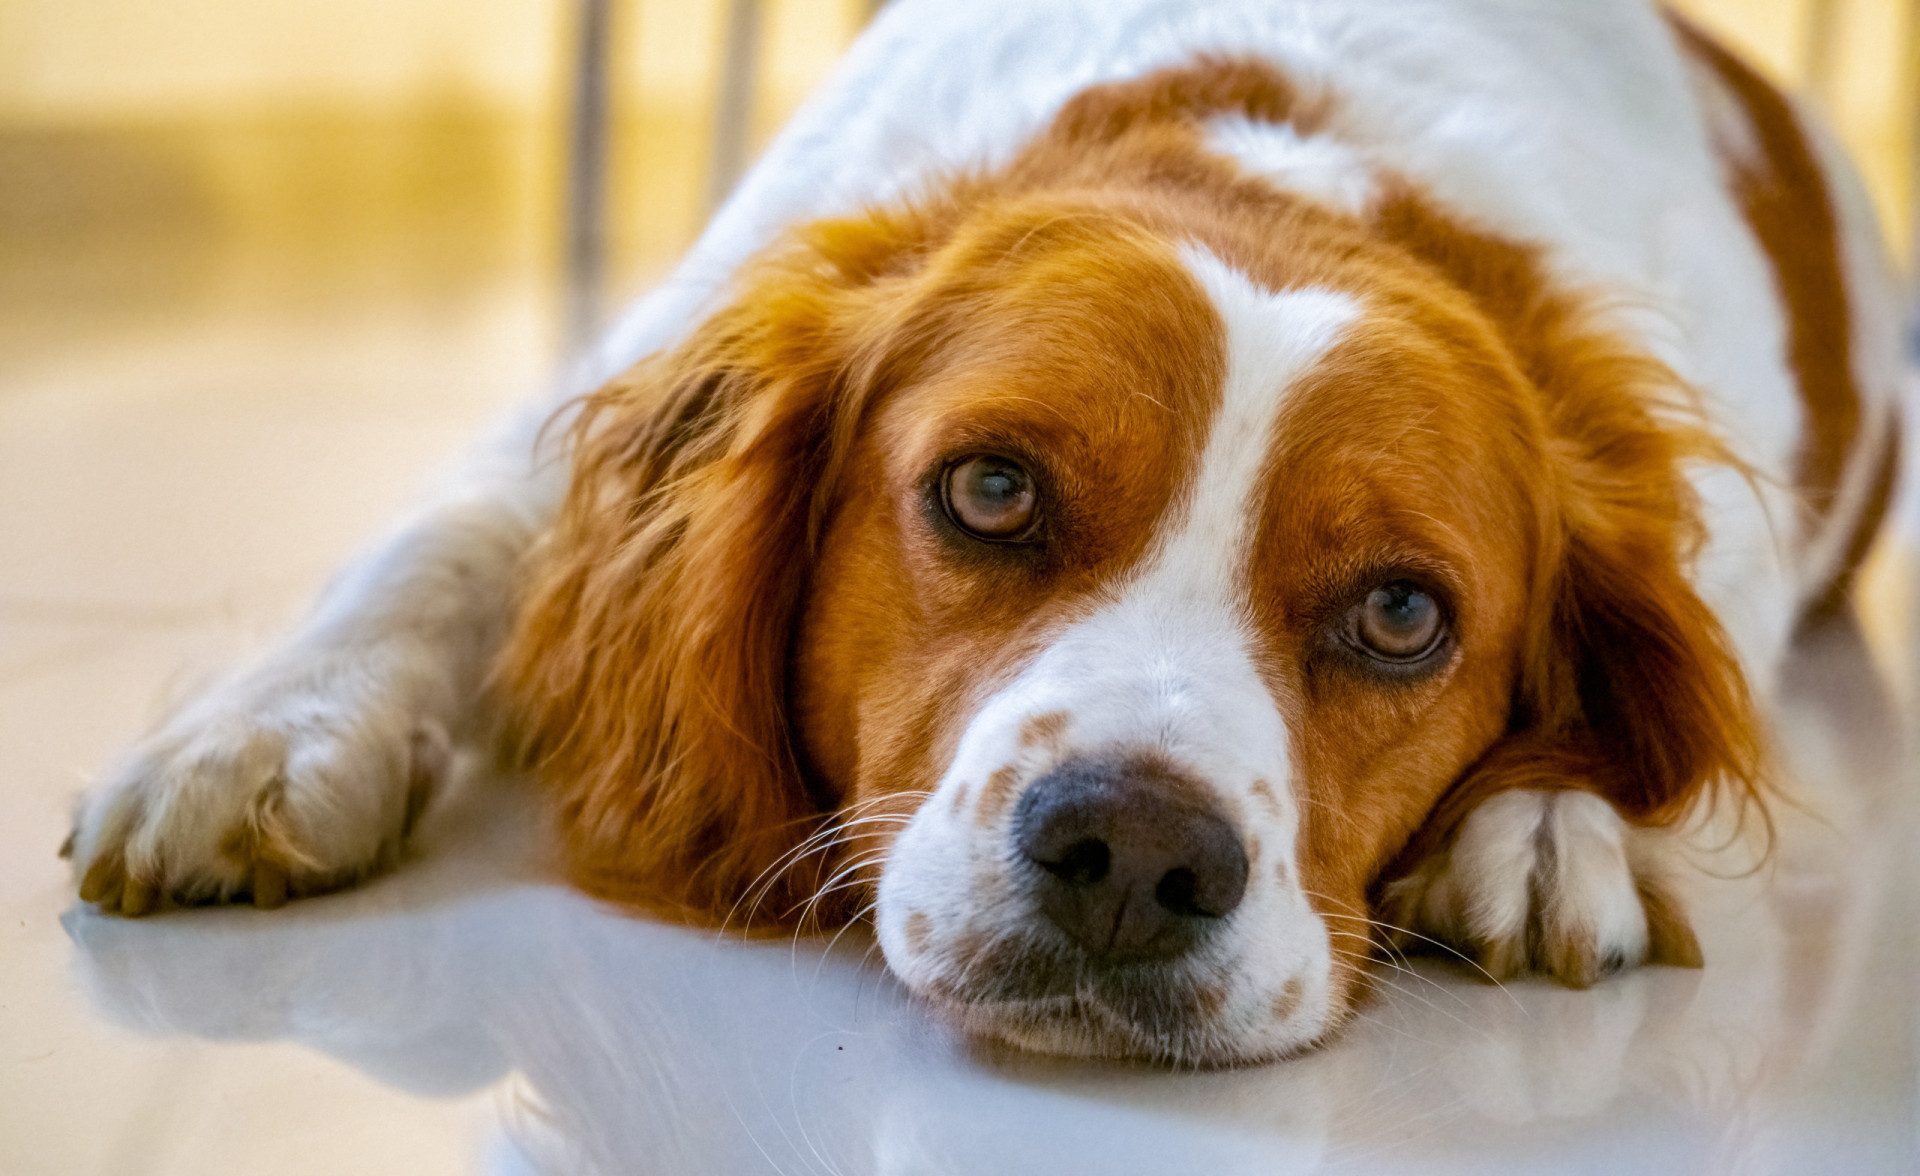 <p>Coming from a working background, the Brittany Spaniel is highly intelligent and easy to train. Their playfulness make them great in families with kids and other pets. They live around 12 to 15 years.  </p><p><a href="https://www.msn.com/en-us/community/channel/vid-7xx8mnucu55yw63we9va2gwr7uihbxwc68fxqp25x6tg4ftibpra?cvid=94631541bc0f4f89bfd59158d696ad7e">Follow us and access great exclusive content every day</a></p>